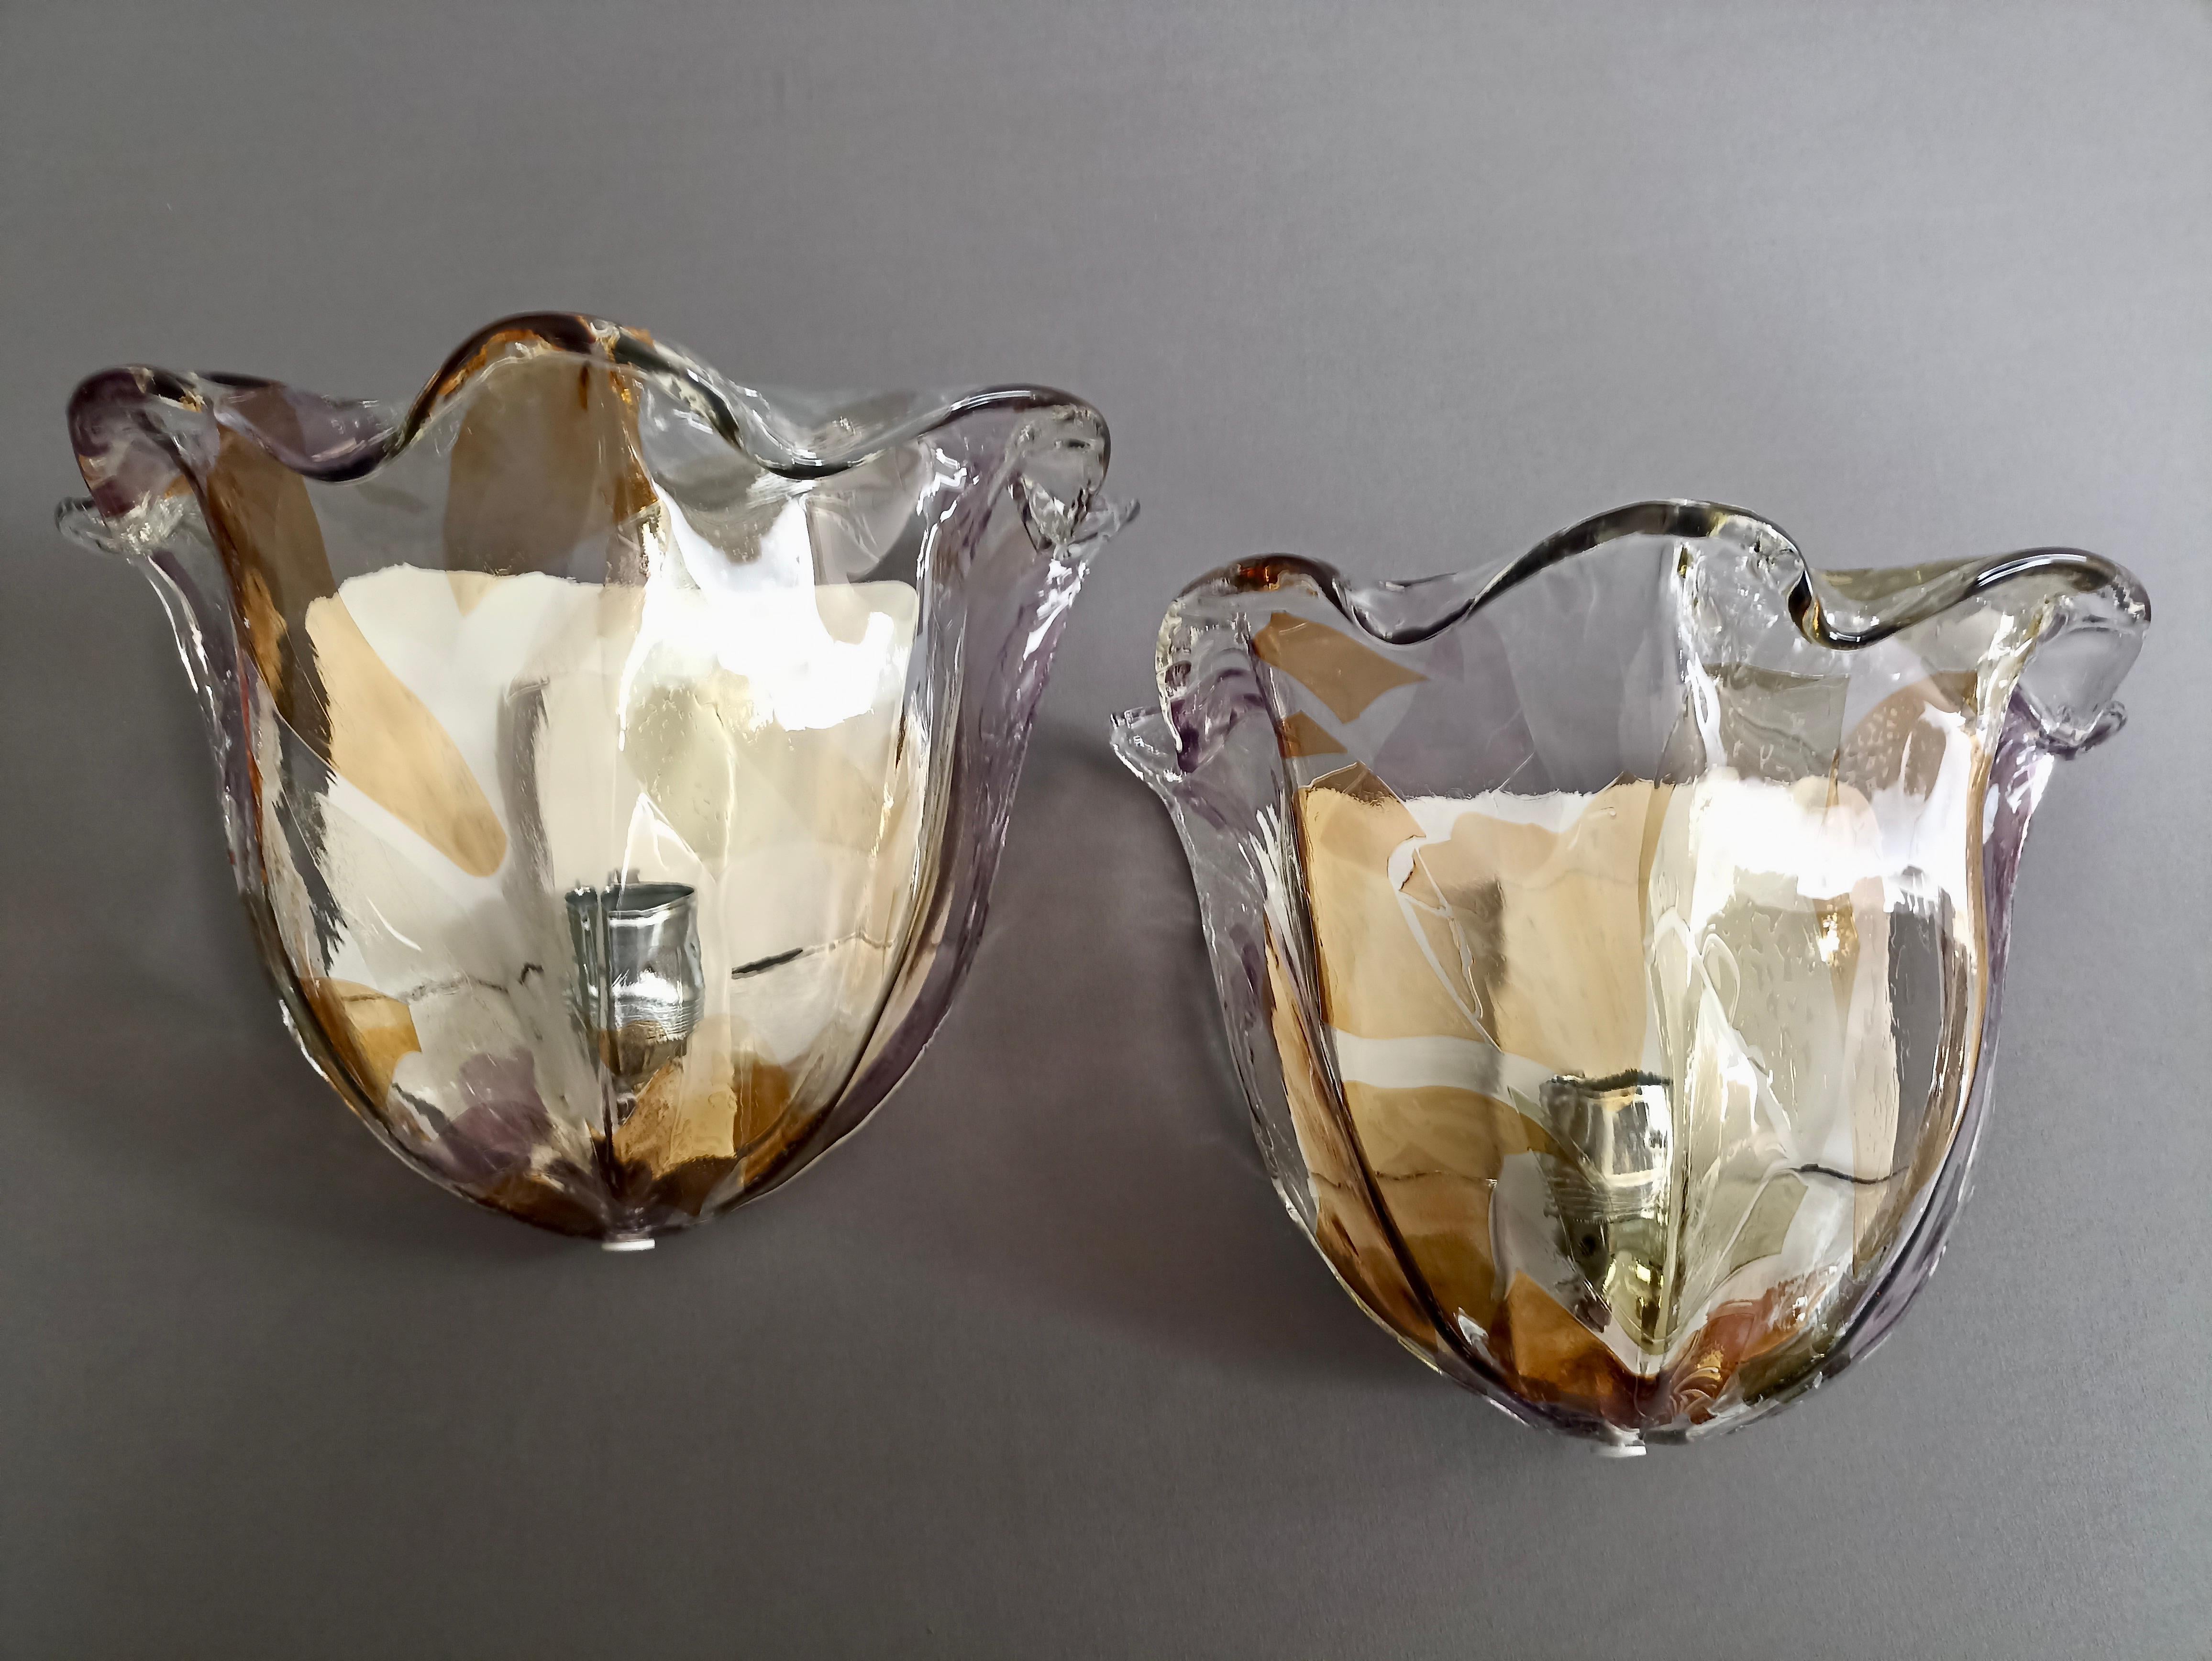 La Murrina Murano set of two extra large sconces in glass and metal. Italy, 80s. 3